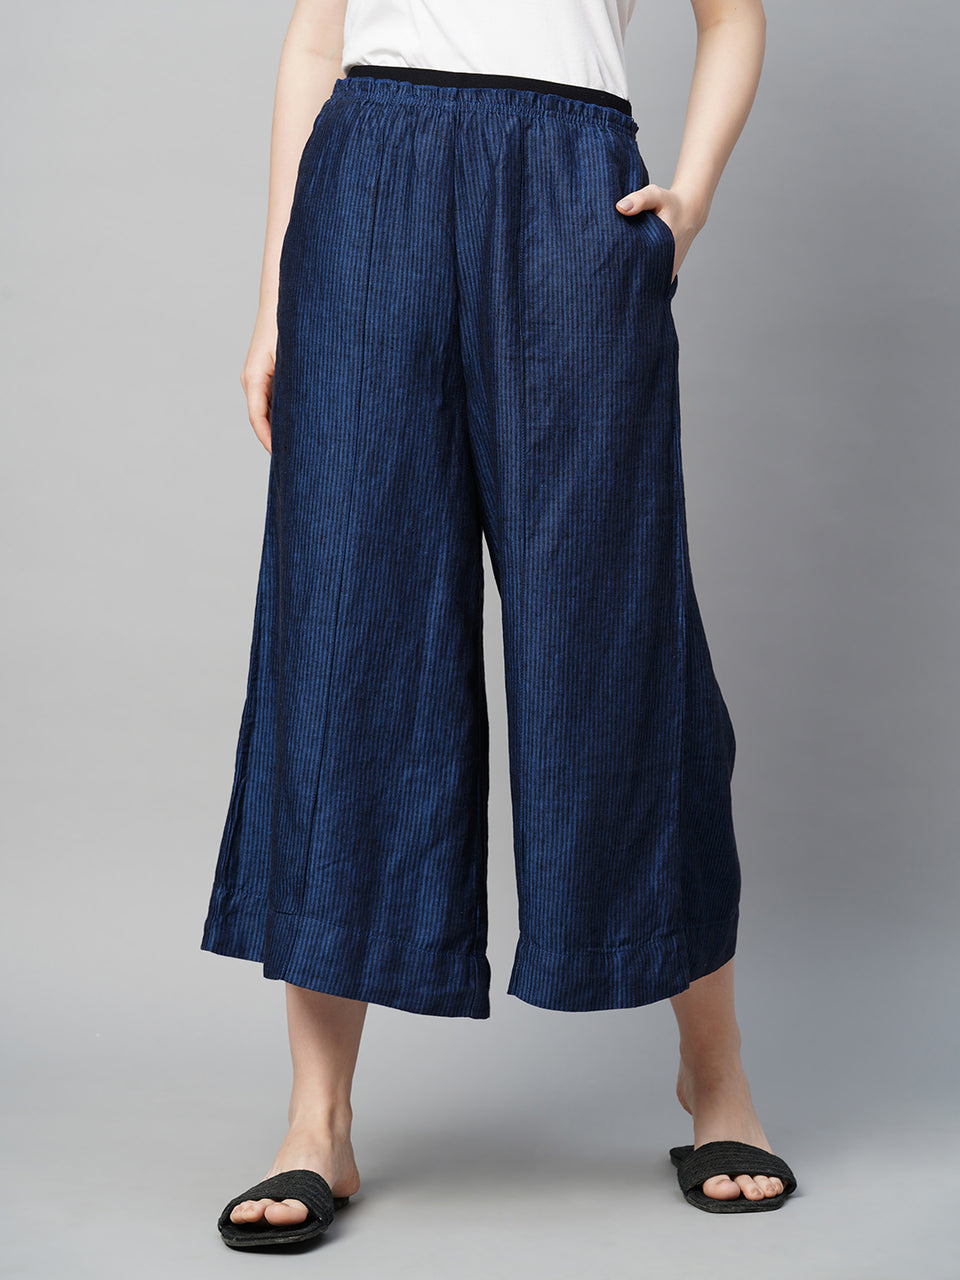 Culottes: Buy Culottes for Women Online at Best Price | Cottonworld